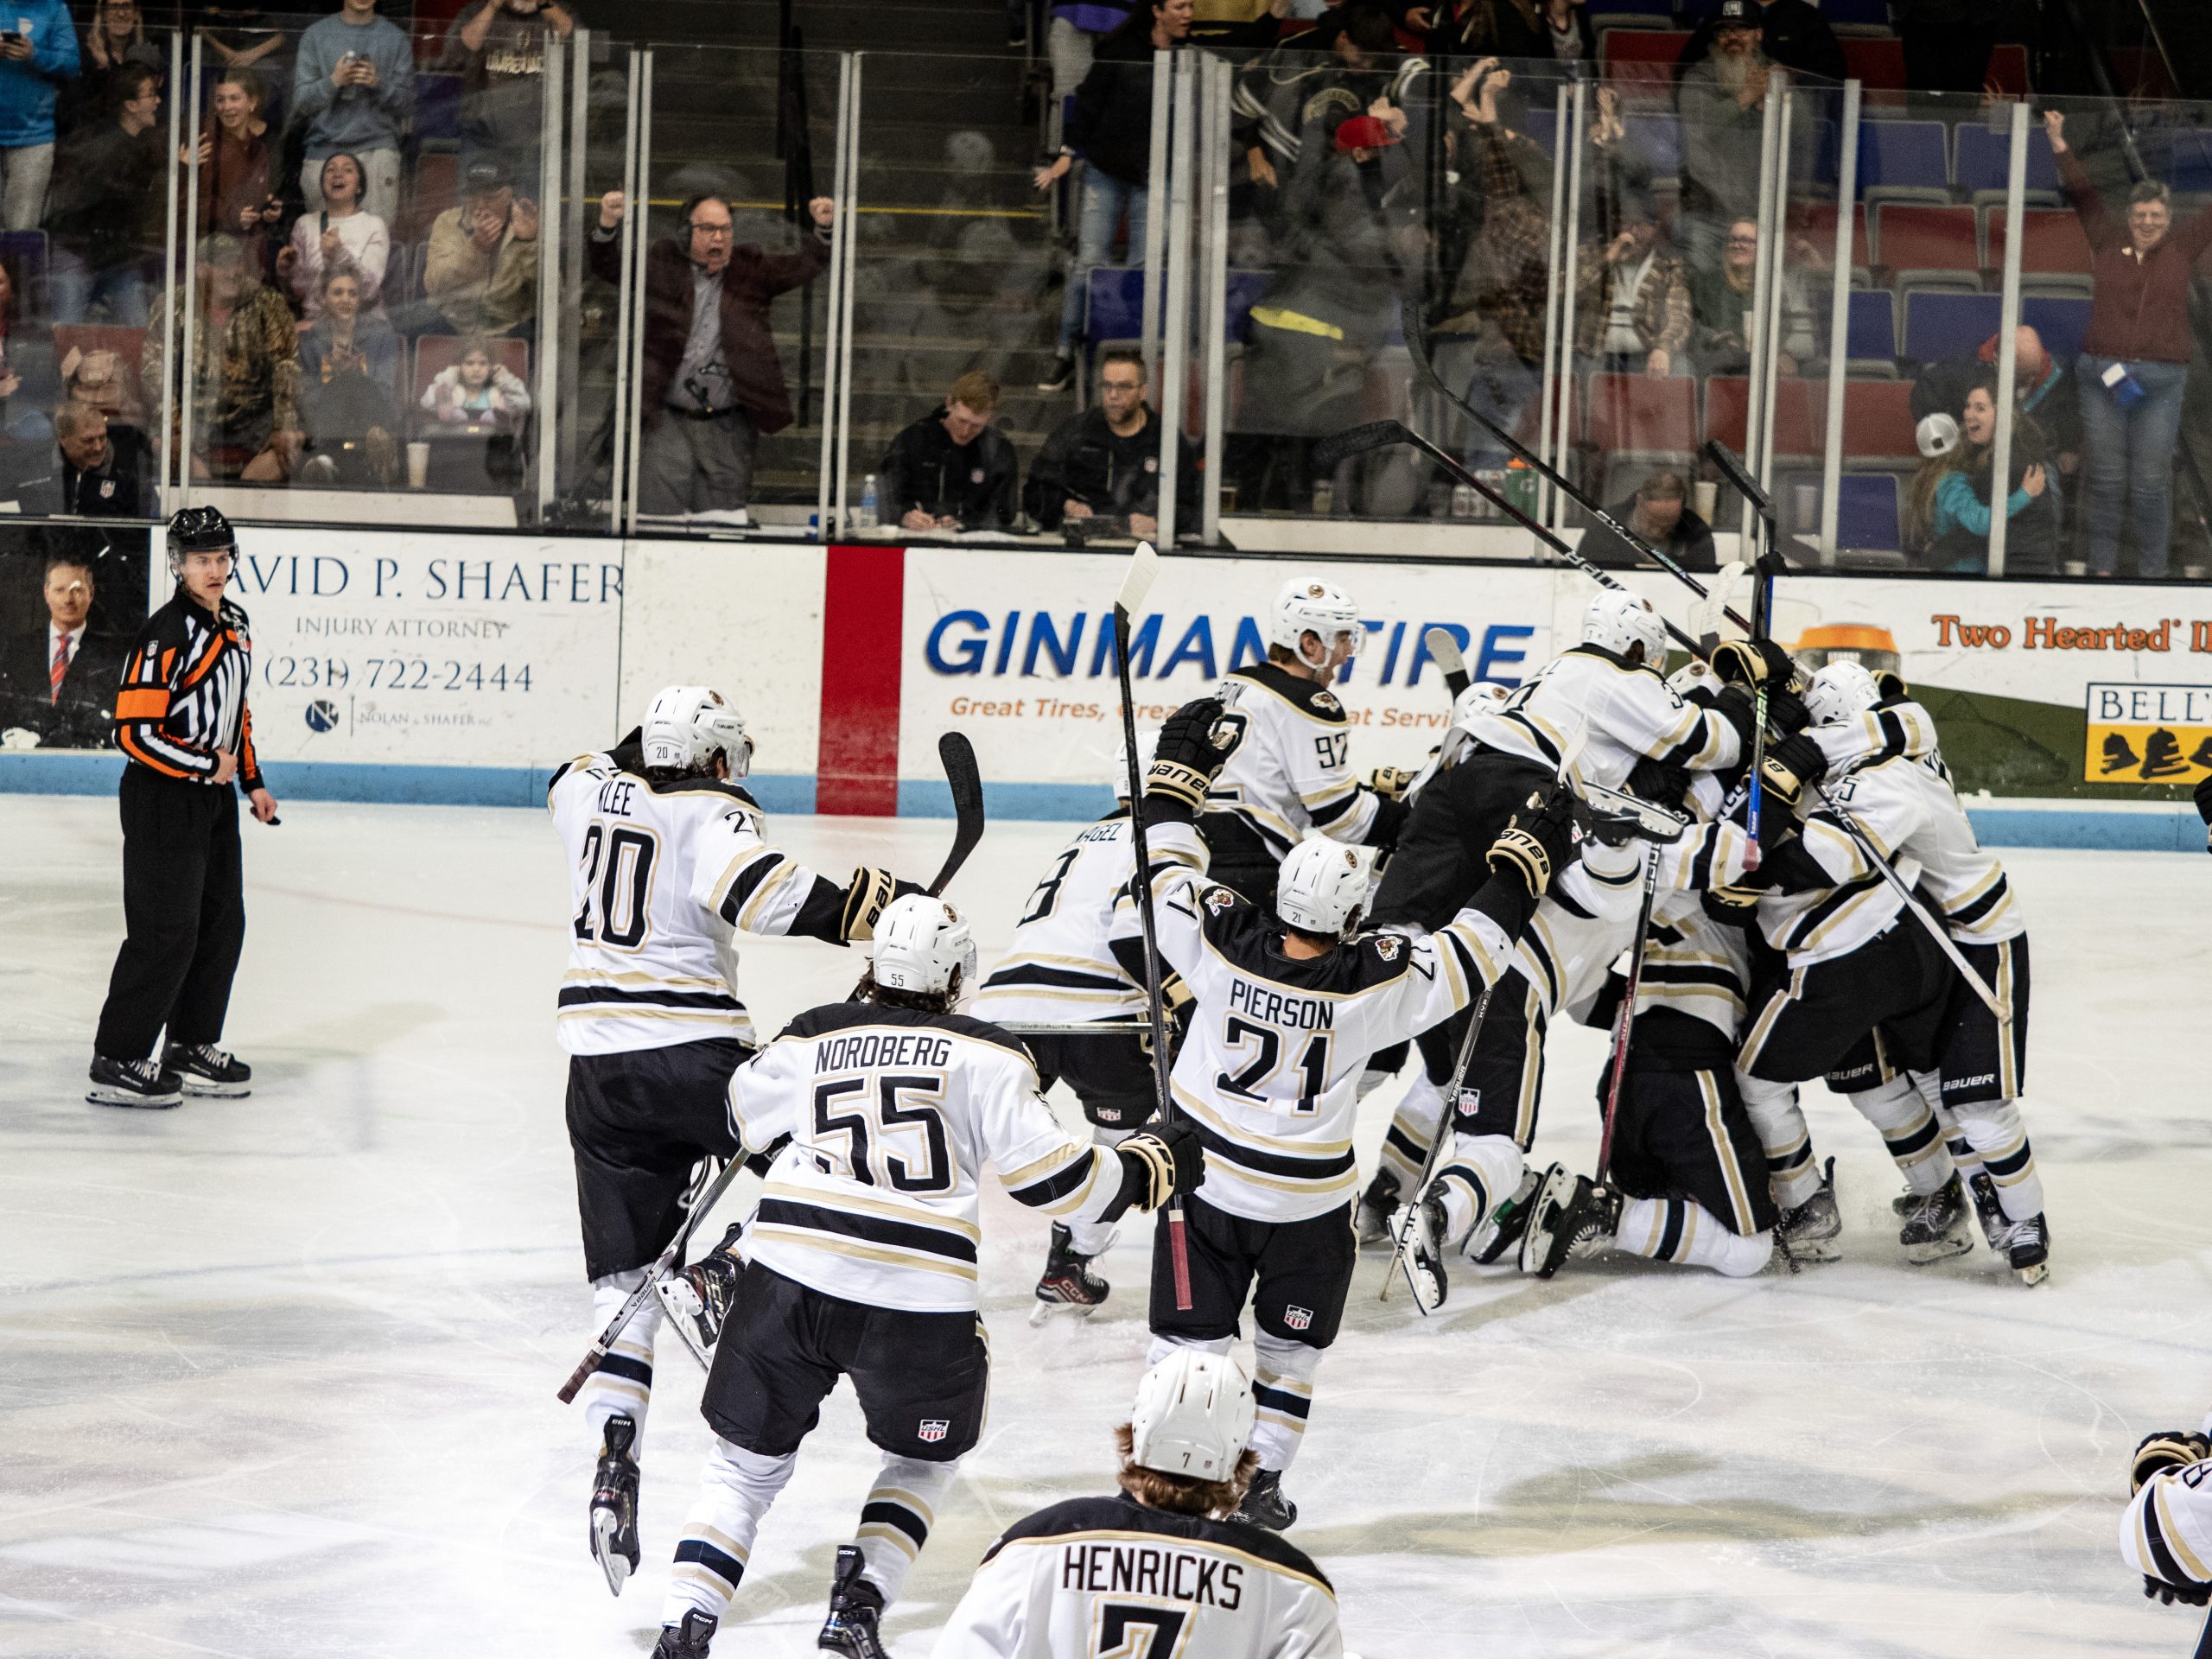 Lumberjacks grab playoff series win in second overtime period to advance over Green Bay